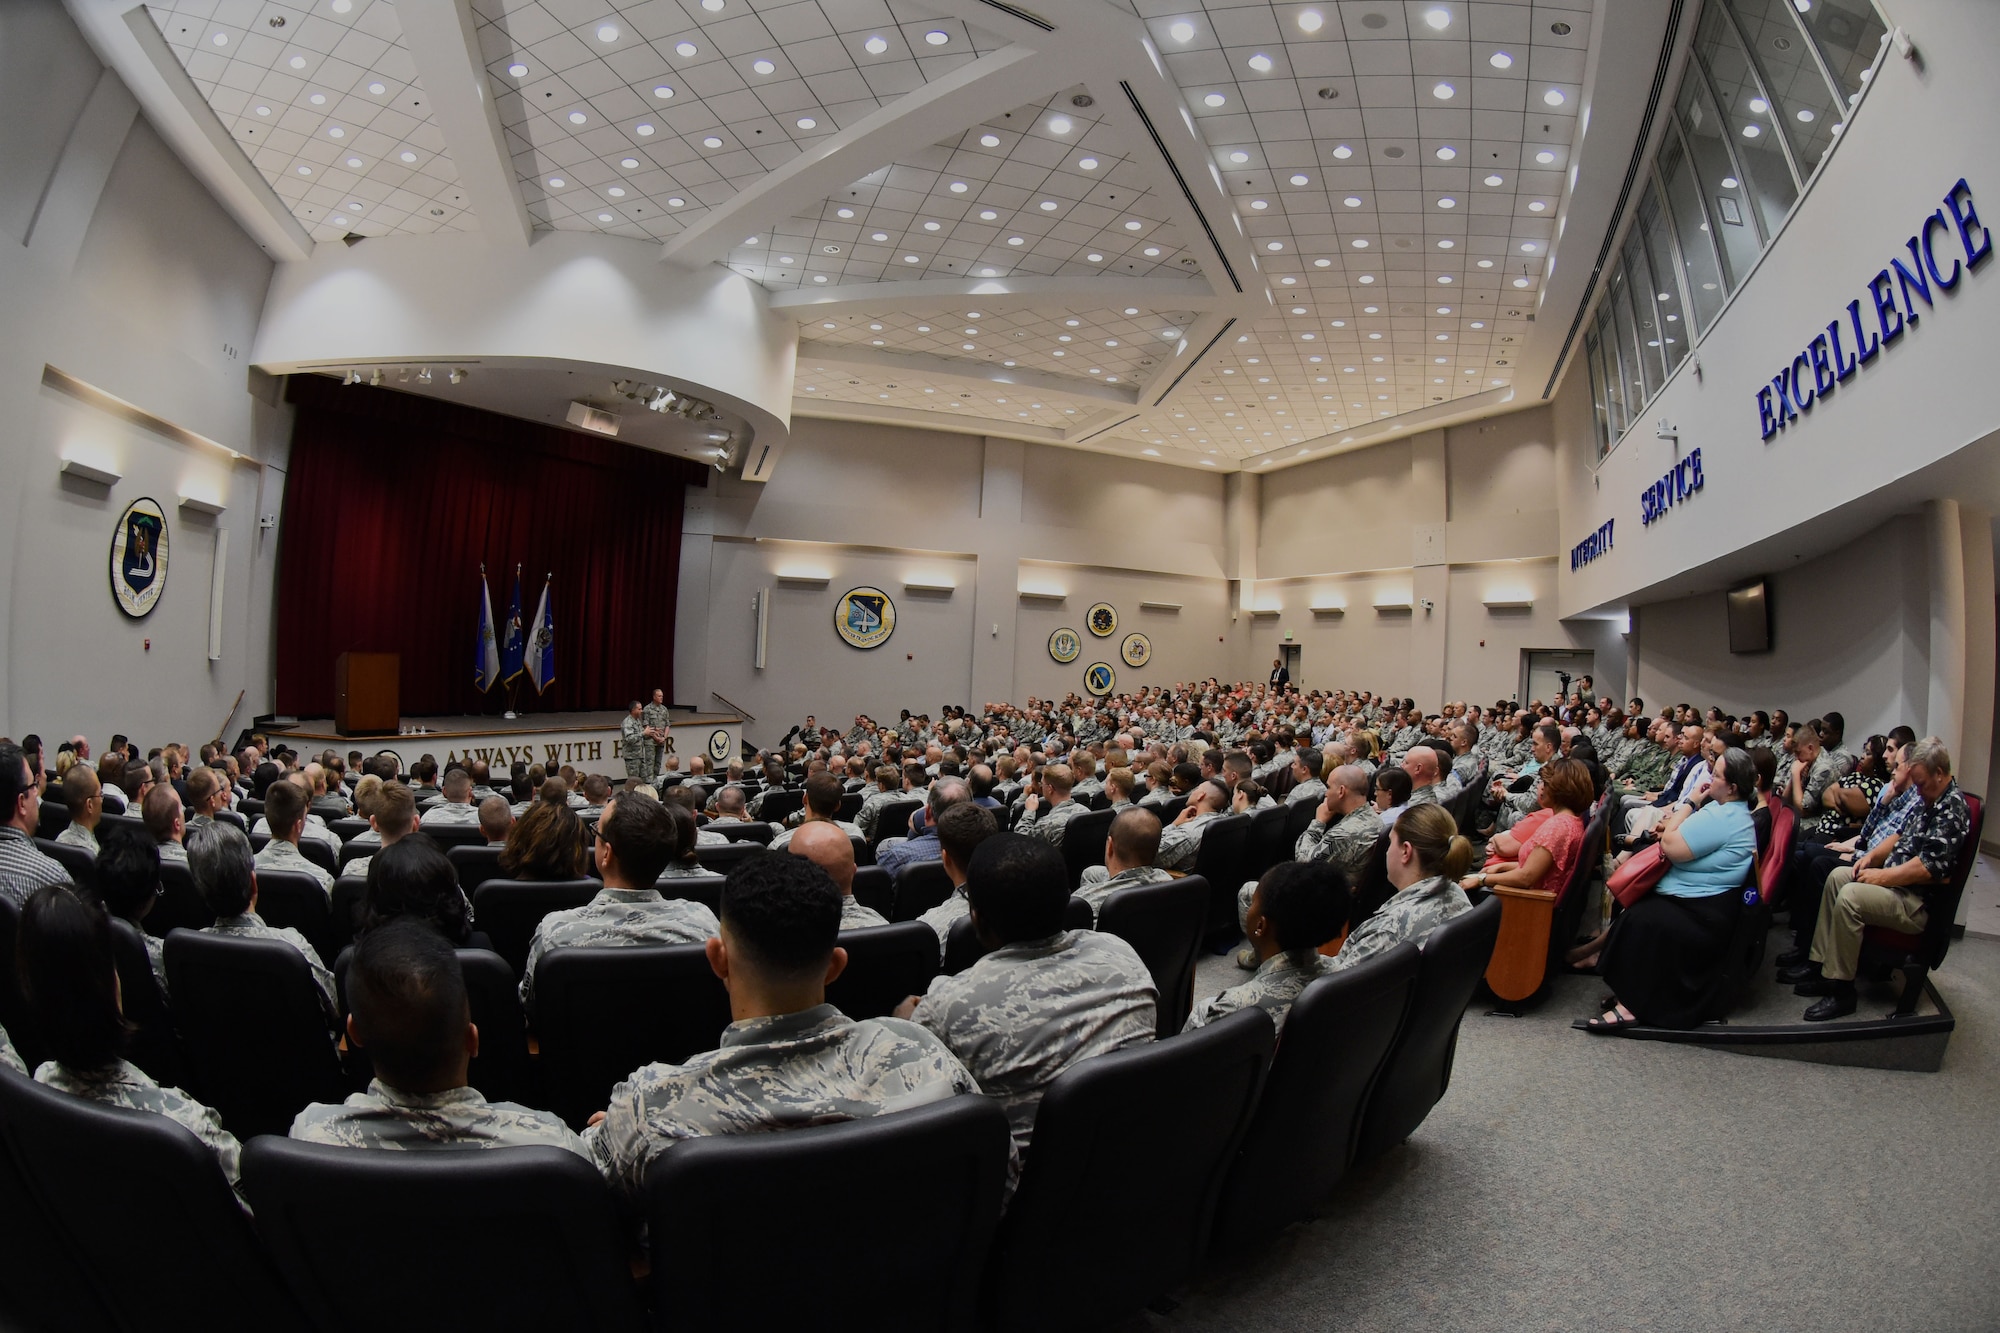 Air Force Chief of Staff Gen. David L. Goldfein and Chief Master Sgt. of the Air Force James A. Cody speak to Airmen at Maxwell Air Force Base, Ala., during a town hall July 20, 2016. The Air Force’s two most senior leaders addressed Airmen’s concerns about topics that included personnel, warfighting and retention. (U.S. Air Force photo/Senior Airman Hailey Haux)